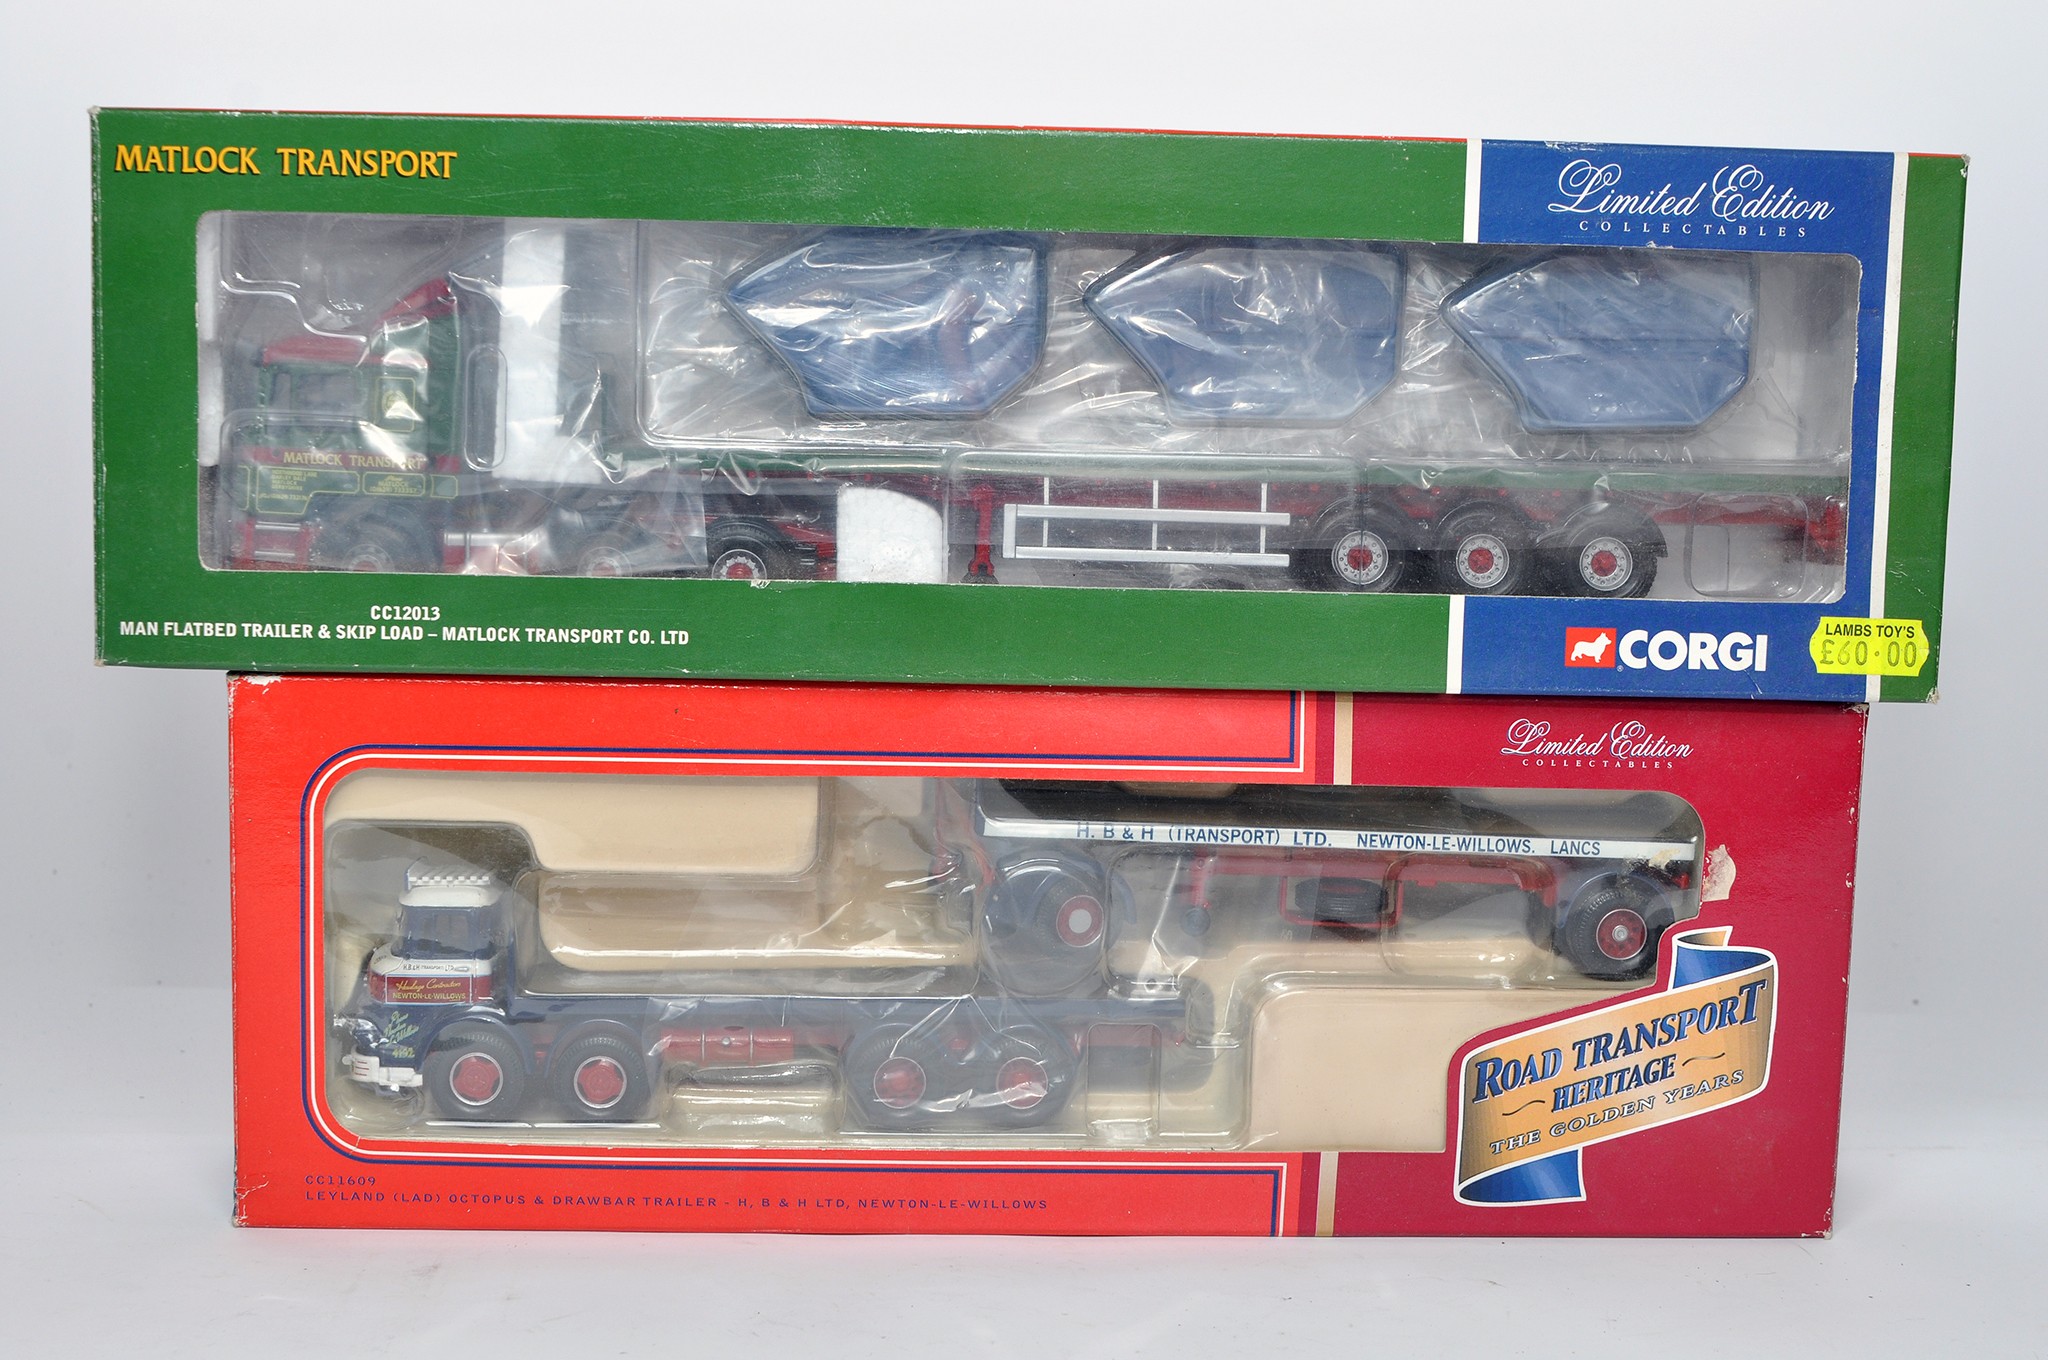 Corgi 1/50 diecast model truck issue comprising No. CC11609 Leyland Drawbar Trailer in the livery of